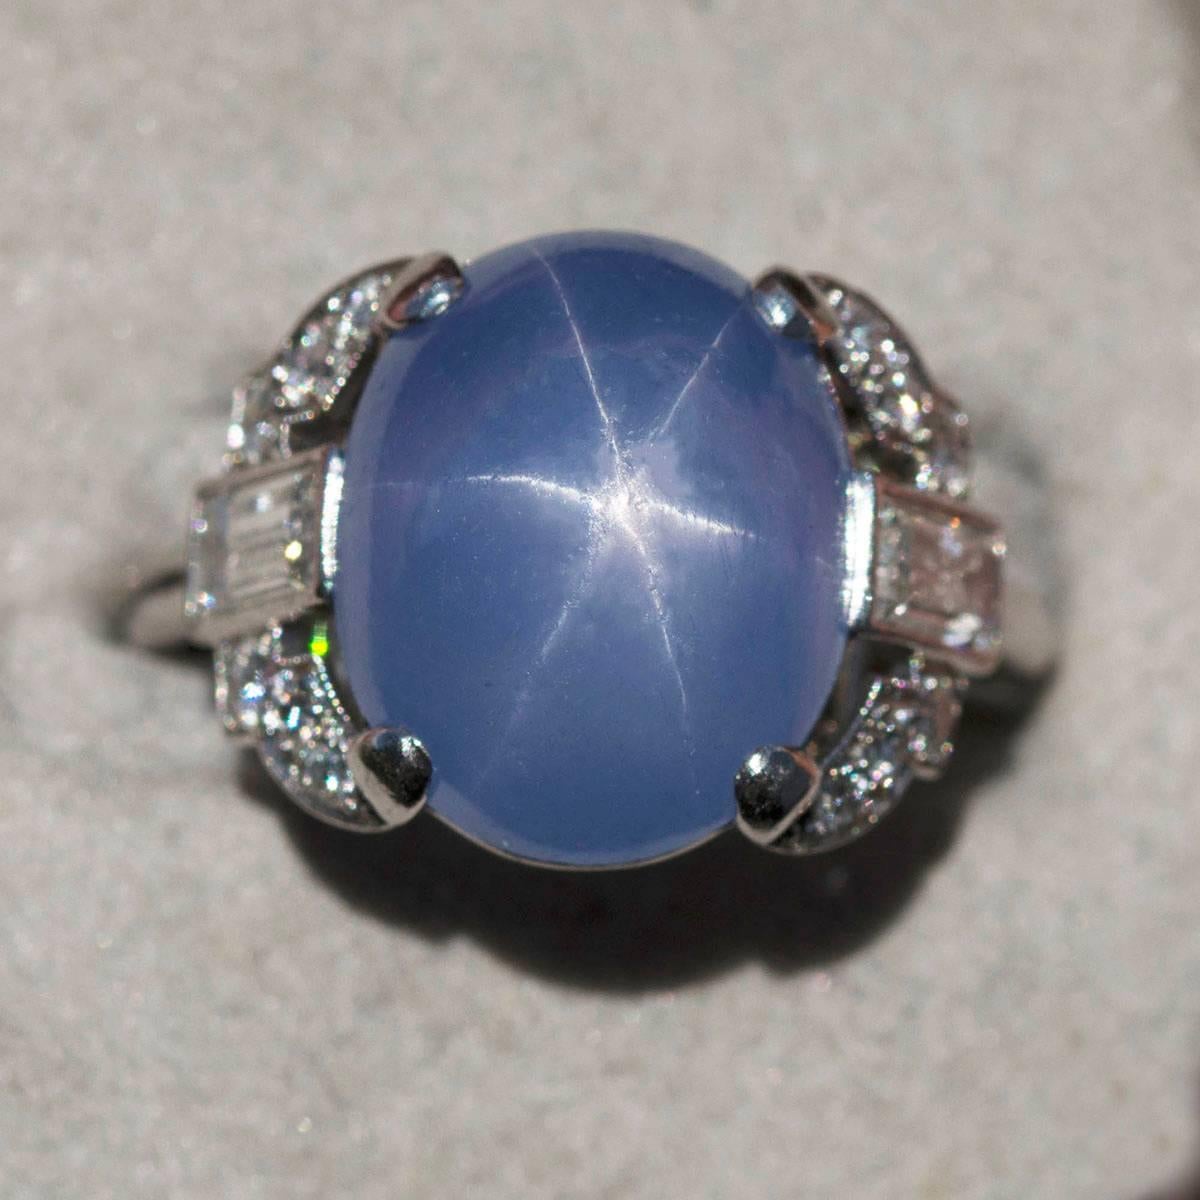 Beautiful Art Deco Platinum Ring with approximately 10 carat sky blue star sapphire and approximately 0.80 carats of baguette and old european cut diamonds.